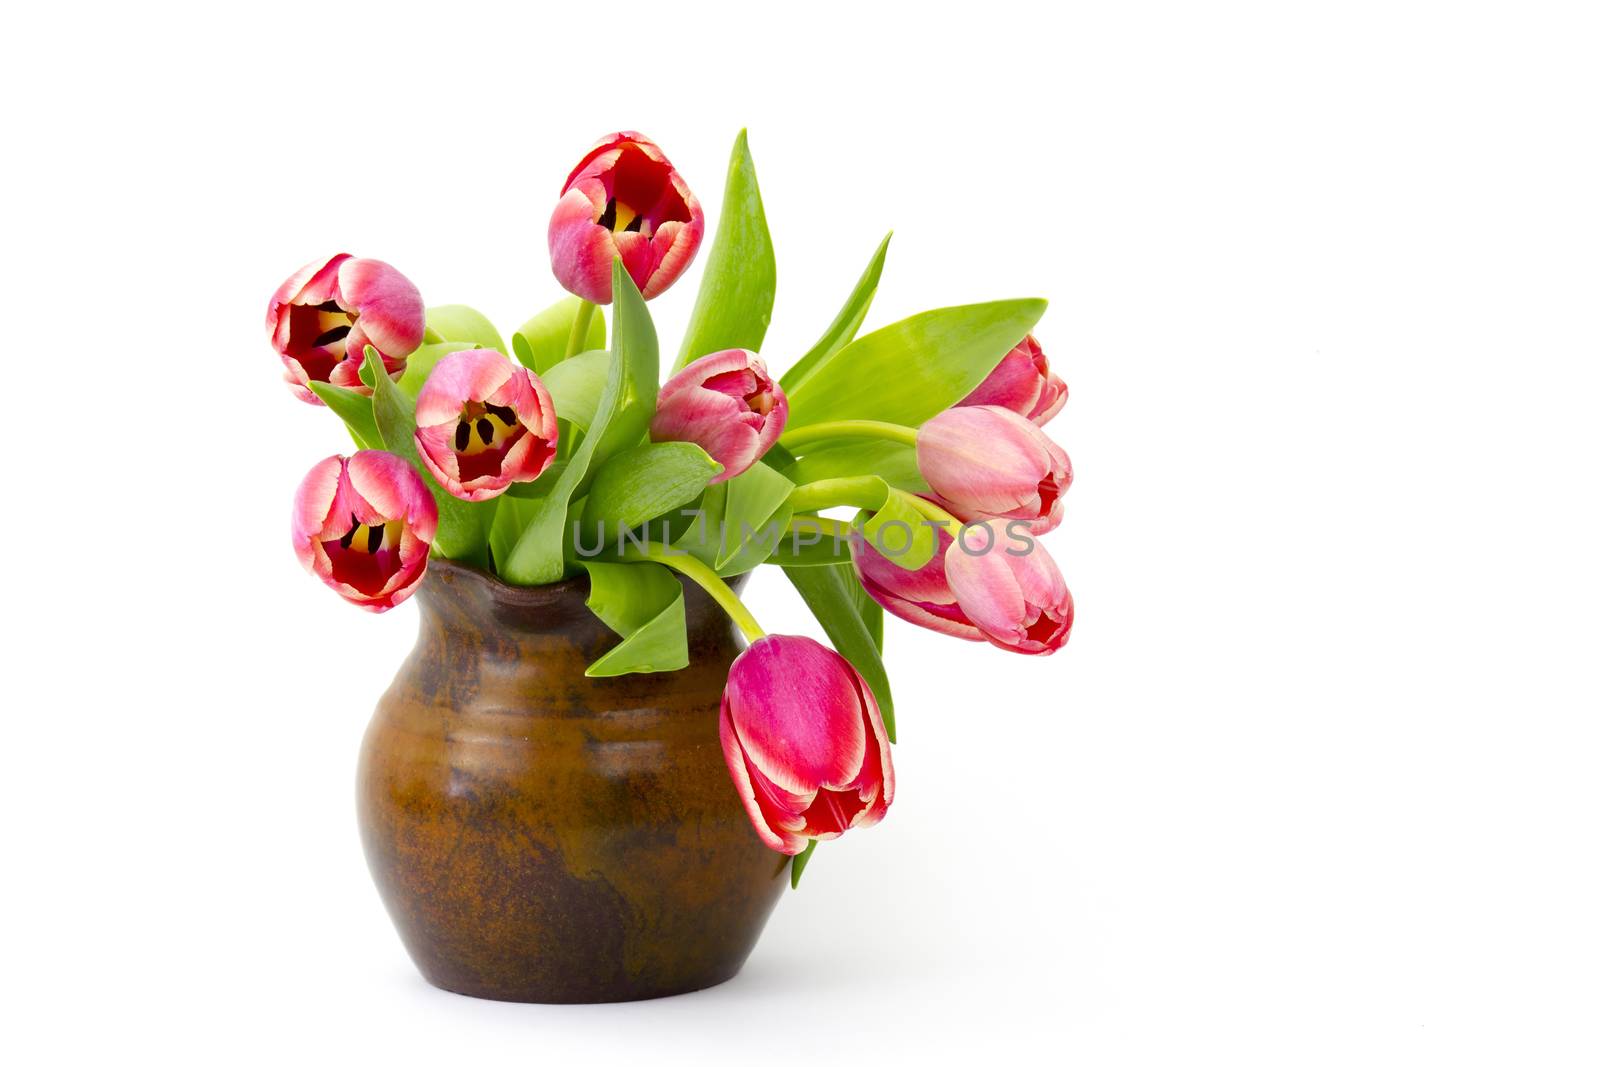 red tulips in a vase by miradrozdowski